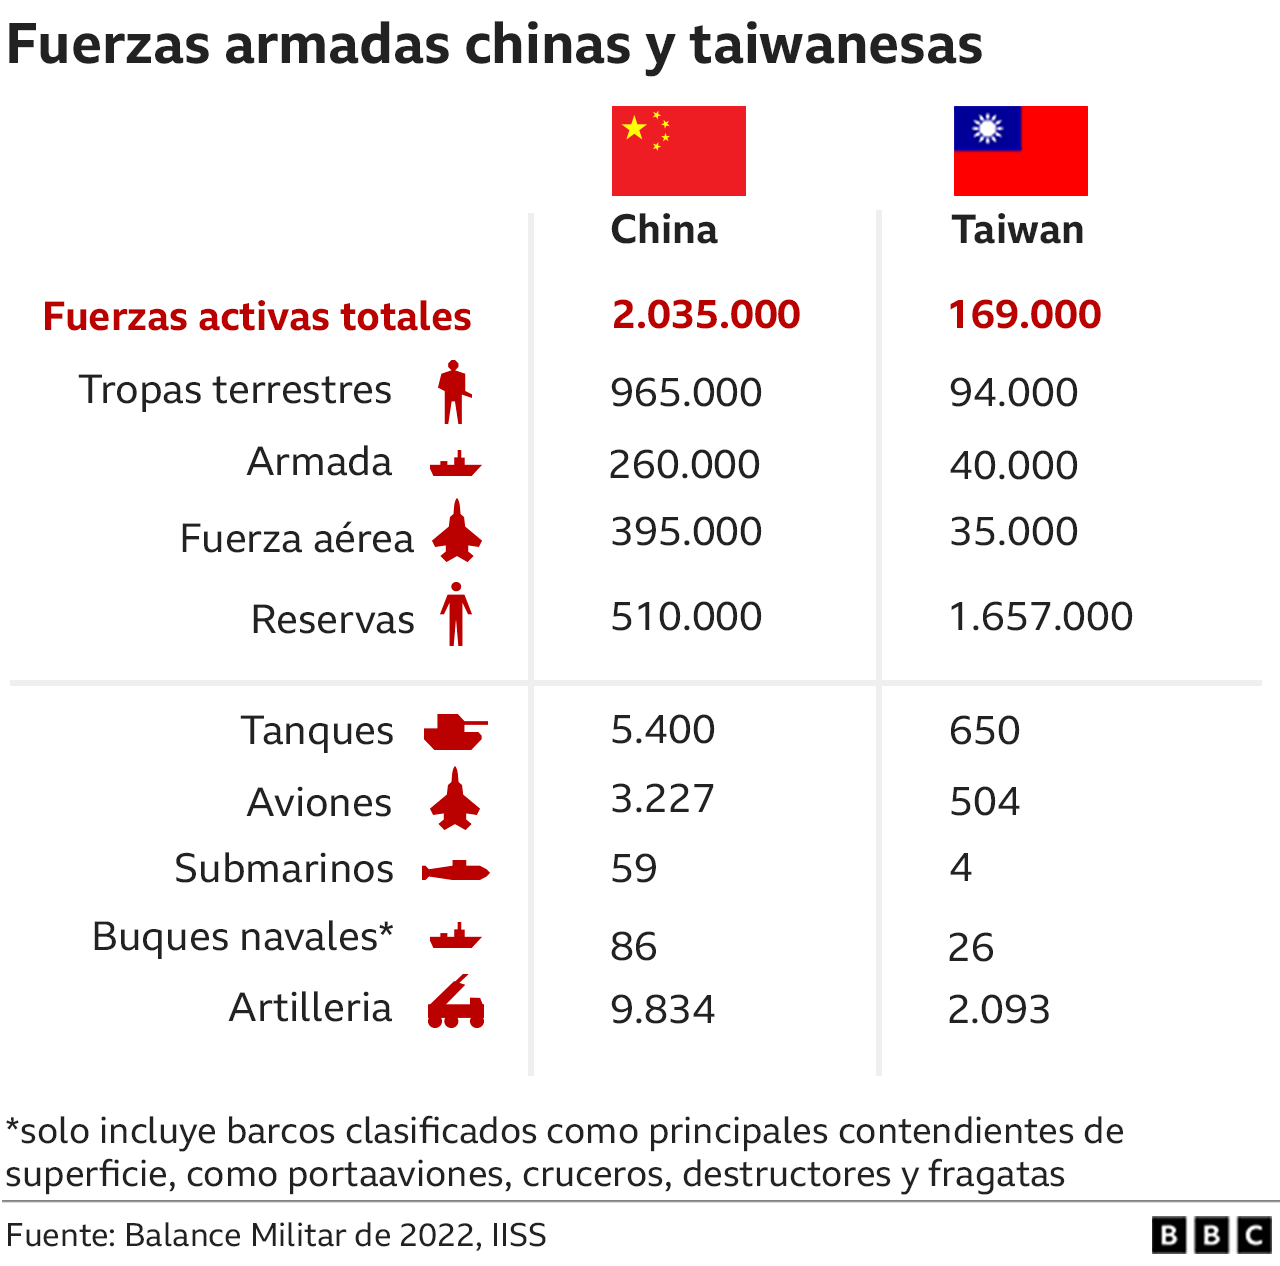 Comparison of Chinese and Taiwanese Armies.